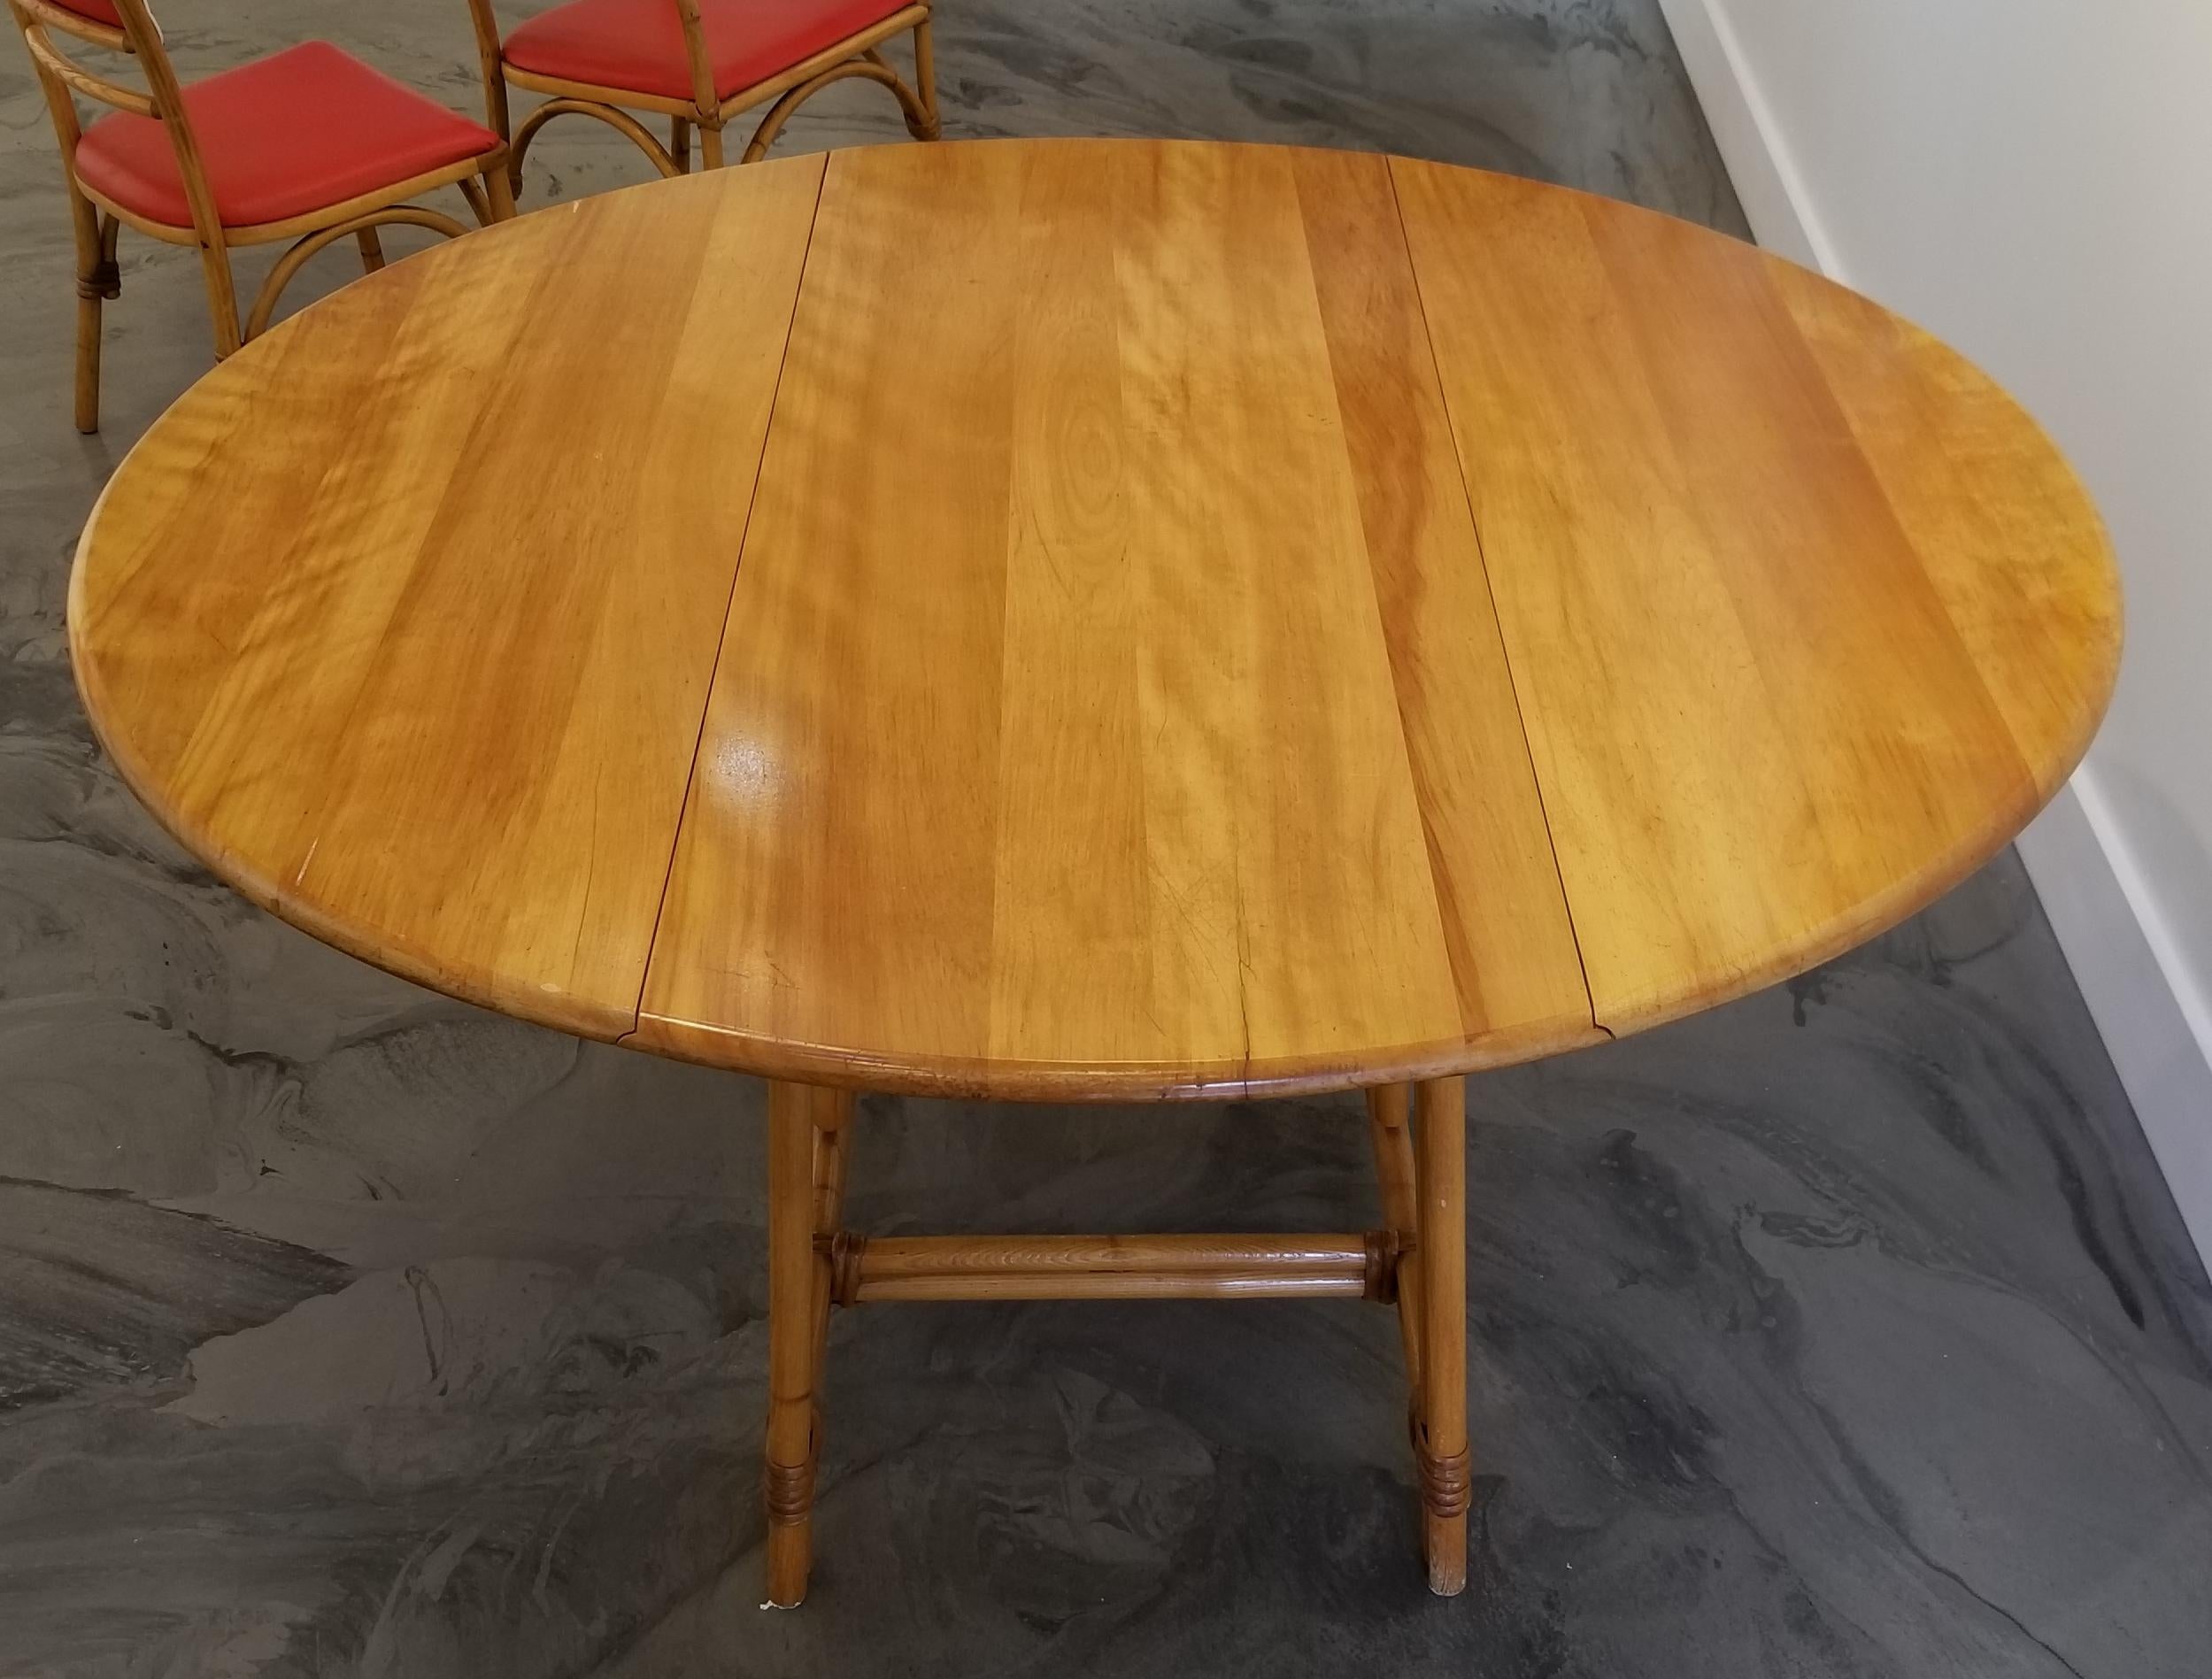 A circular gateleg dining table by Heywood Wakefield. Beautiful wood grain to solid maple top with warm glow to finish. Steamed ash hardwood undercarriage bound with rattan. Fully open measures 54 inch diameter. Retains Heywood Wakefield branded